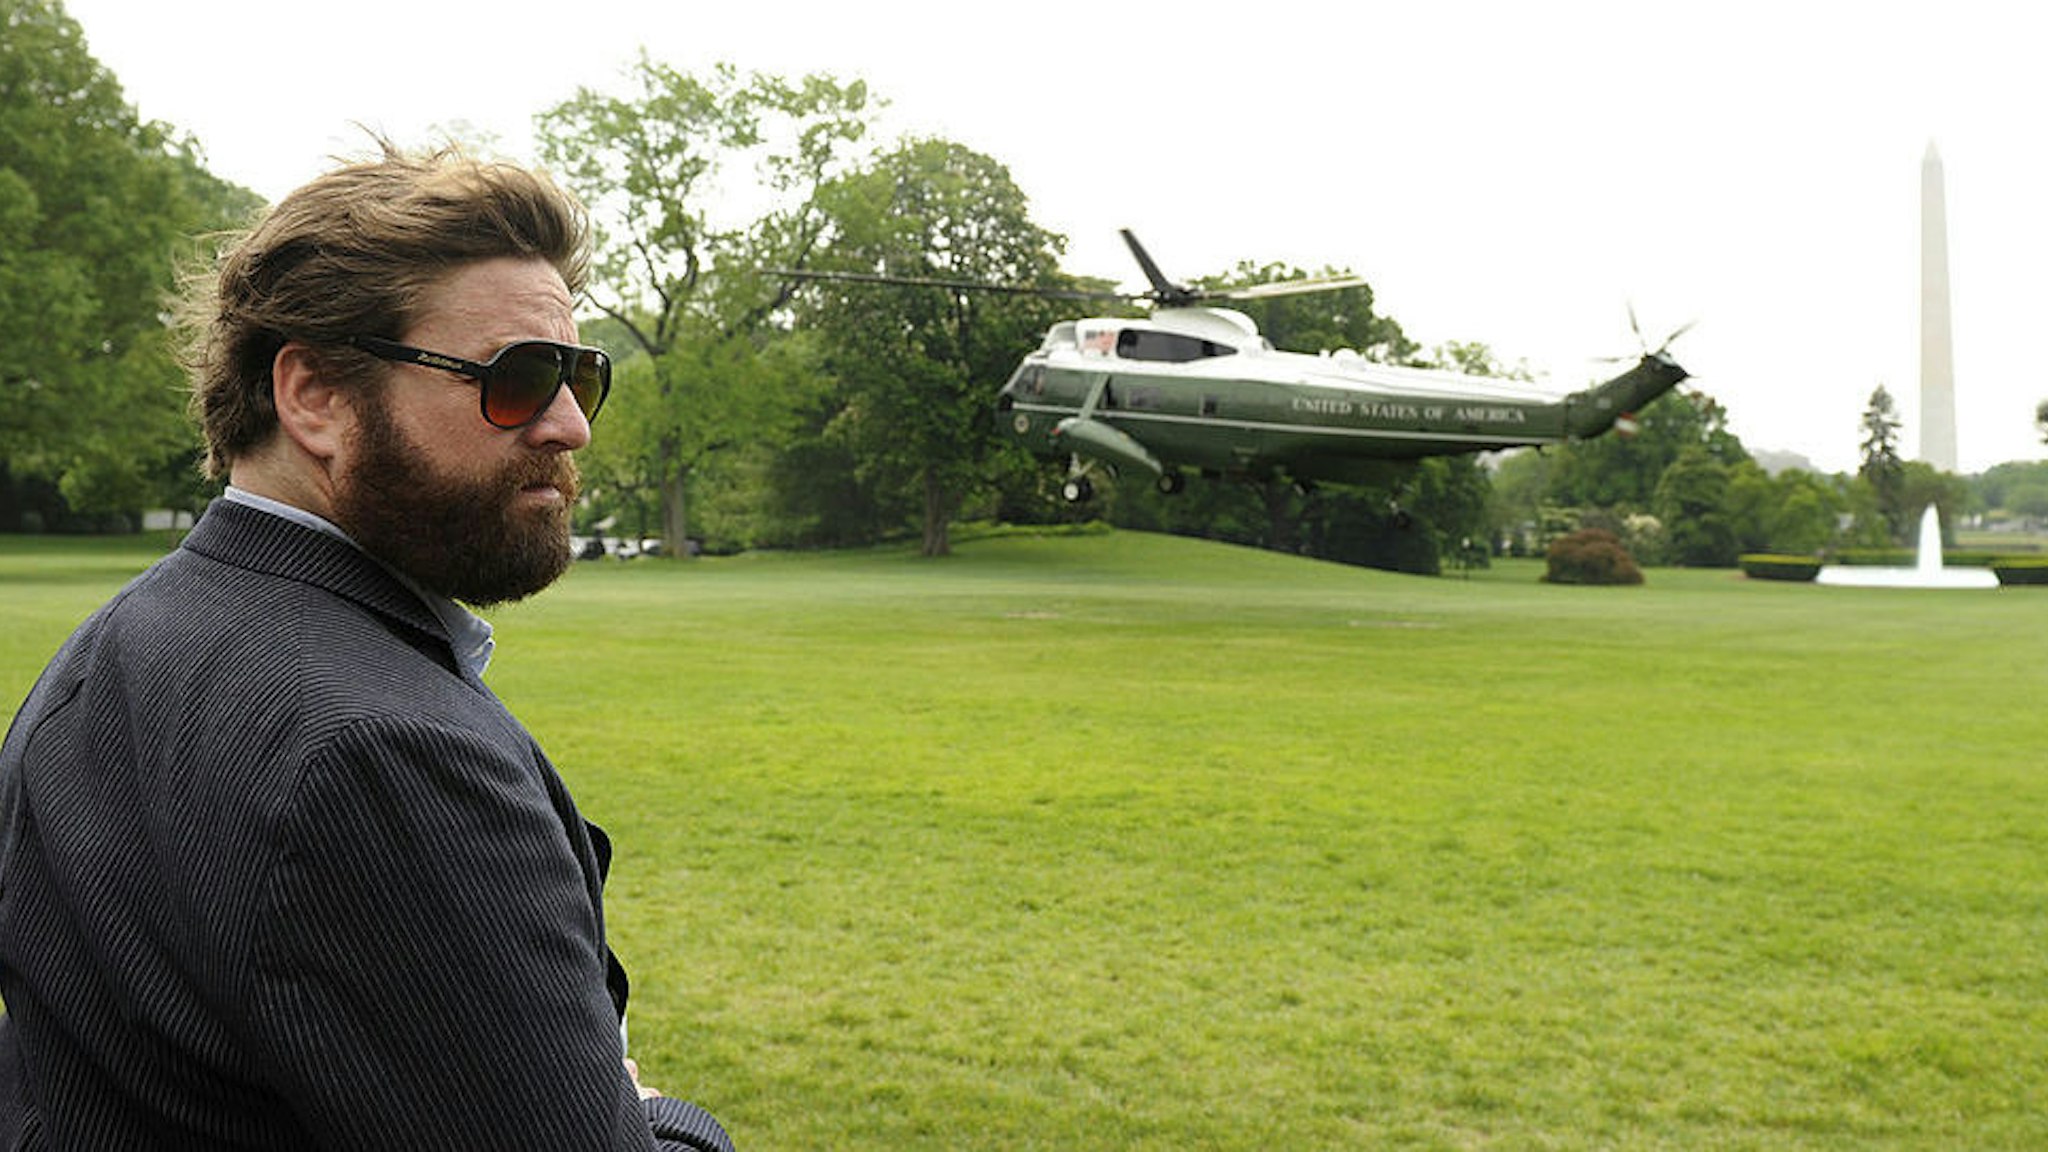 Comedy actor Zach Galifianakis, who recently starred in the movie "The Hangover" witnesses the liftoff of Marine One helicopter, at the White House, bearing U.S. President Barack Obama, in Washington, D.C., May 2, 201,0 on his way to Louisiana, where he will conduct a personal assessment of the aftermath of the explosion of a BP oil rig in the Gulf. (Photo by Mike Theiler/Black Star)